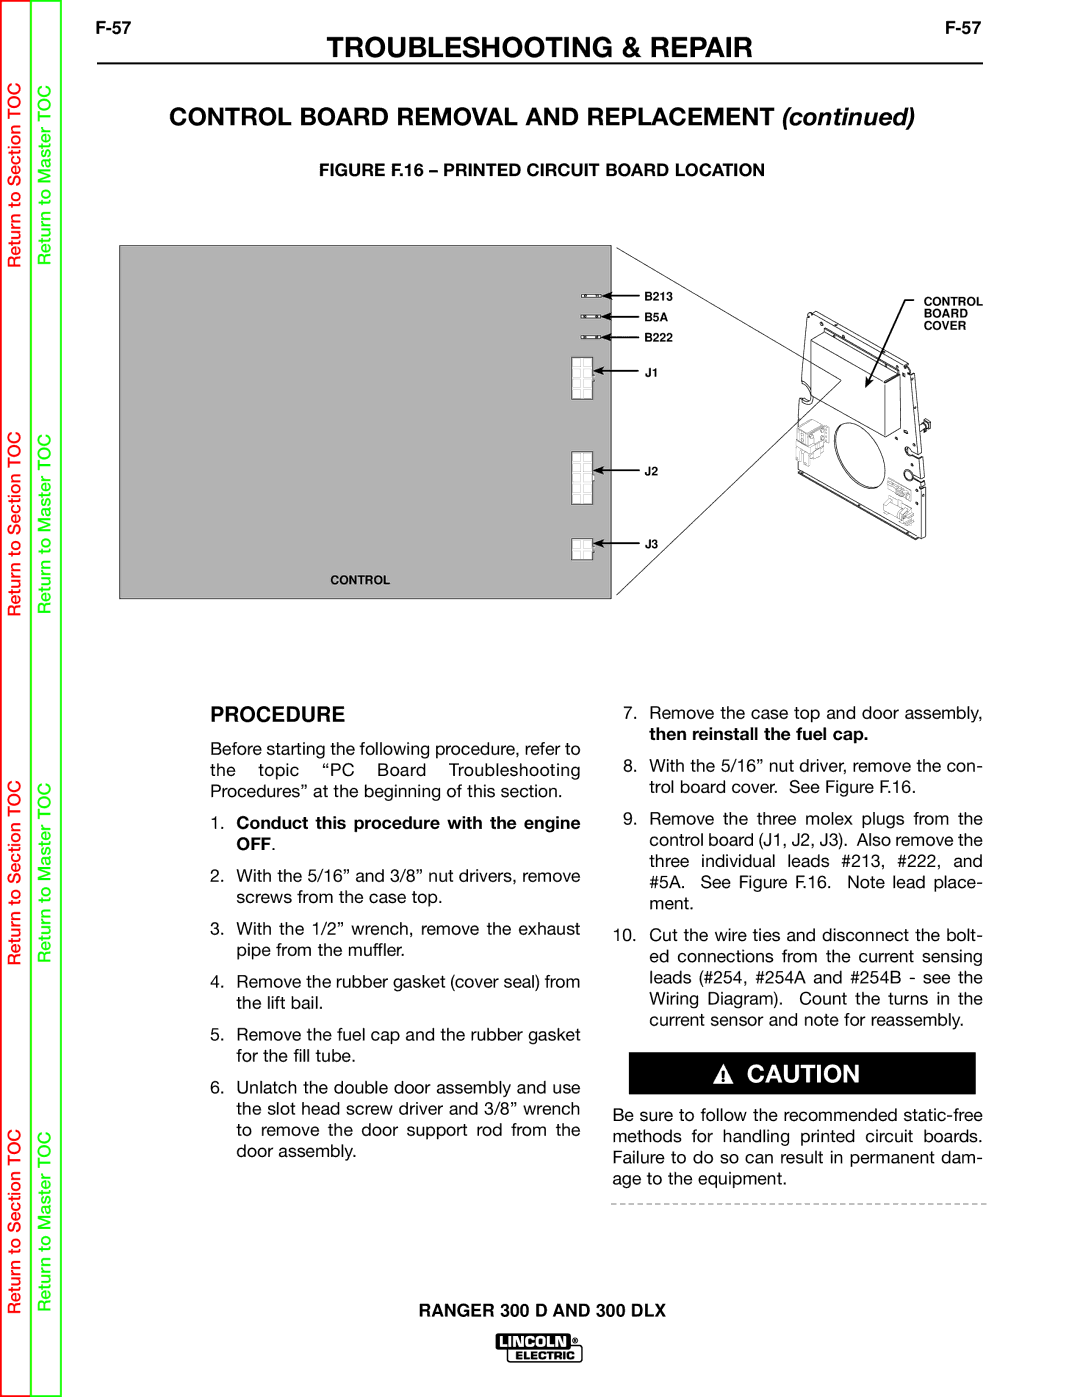 Lincoln Electric SVM148-B service manual Control Board Removal and Replacement, Figure F.16 Printed Circuit Board Location 